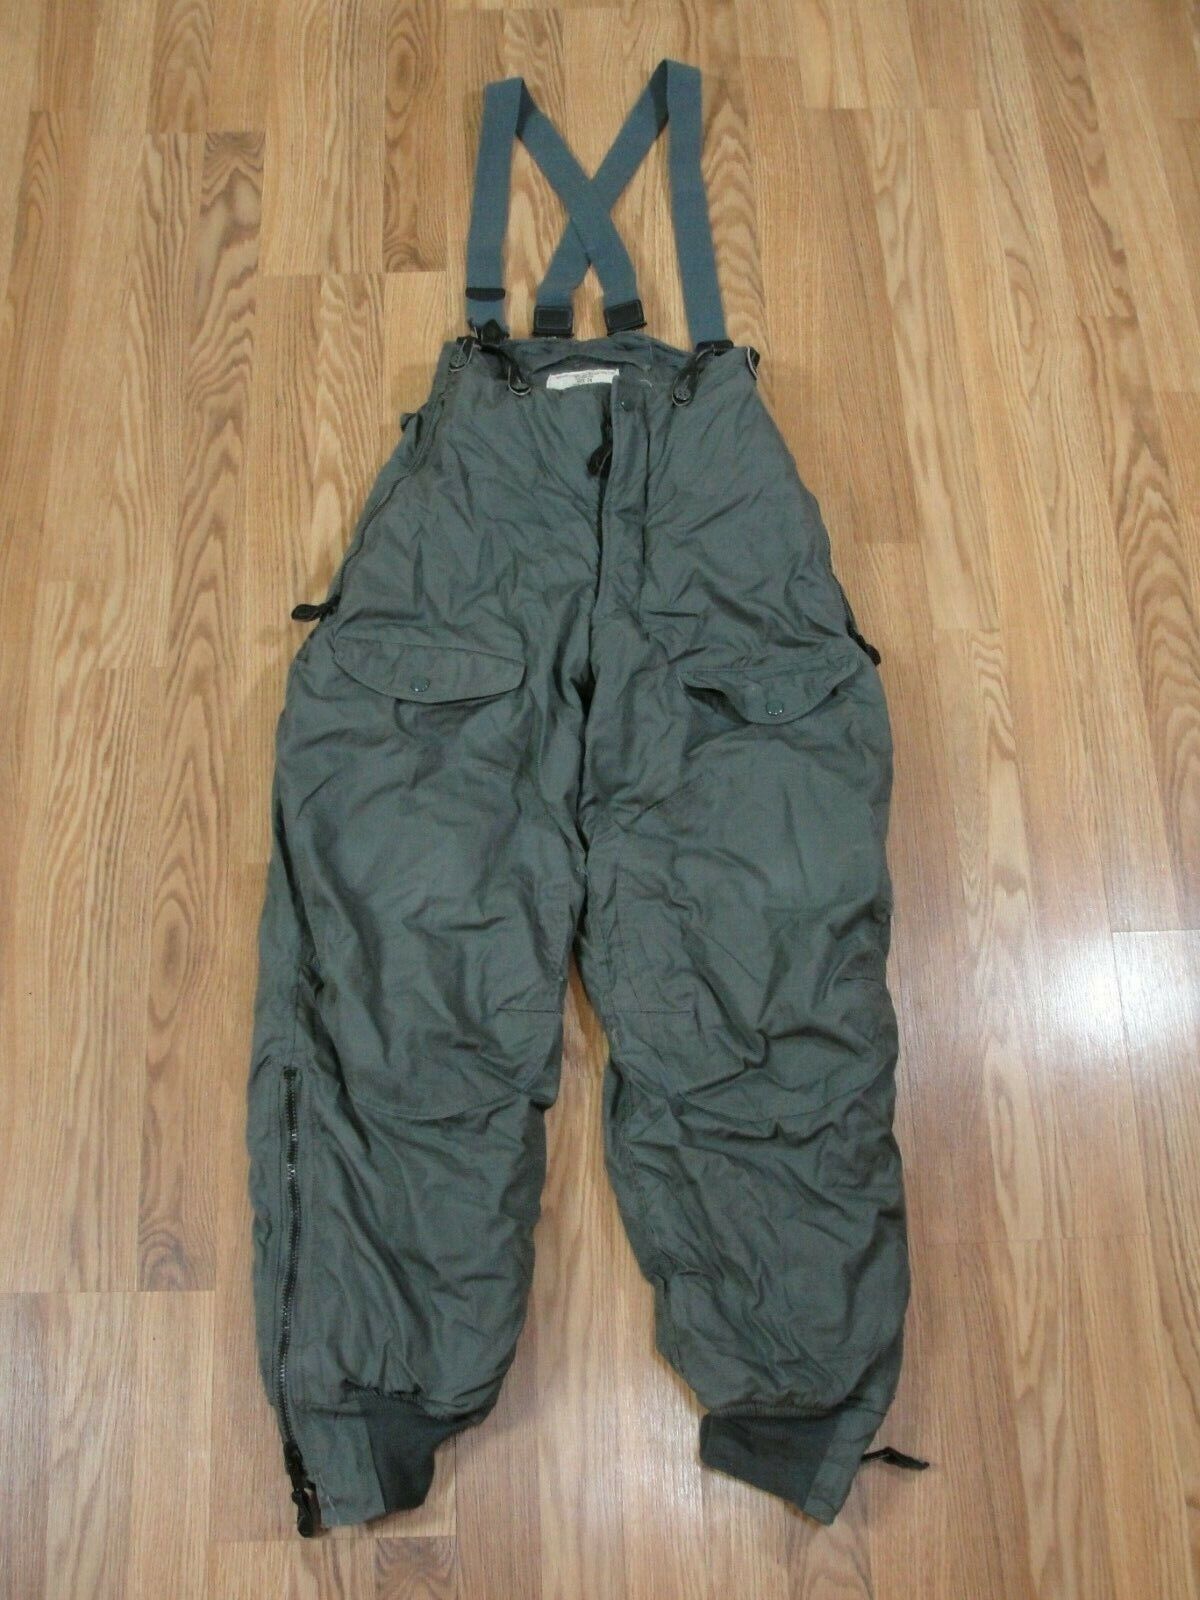 Type F-1B Extreme Cold Weather Trousers Size 24 8415-00-394-3598 Vintage USAF